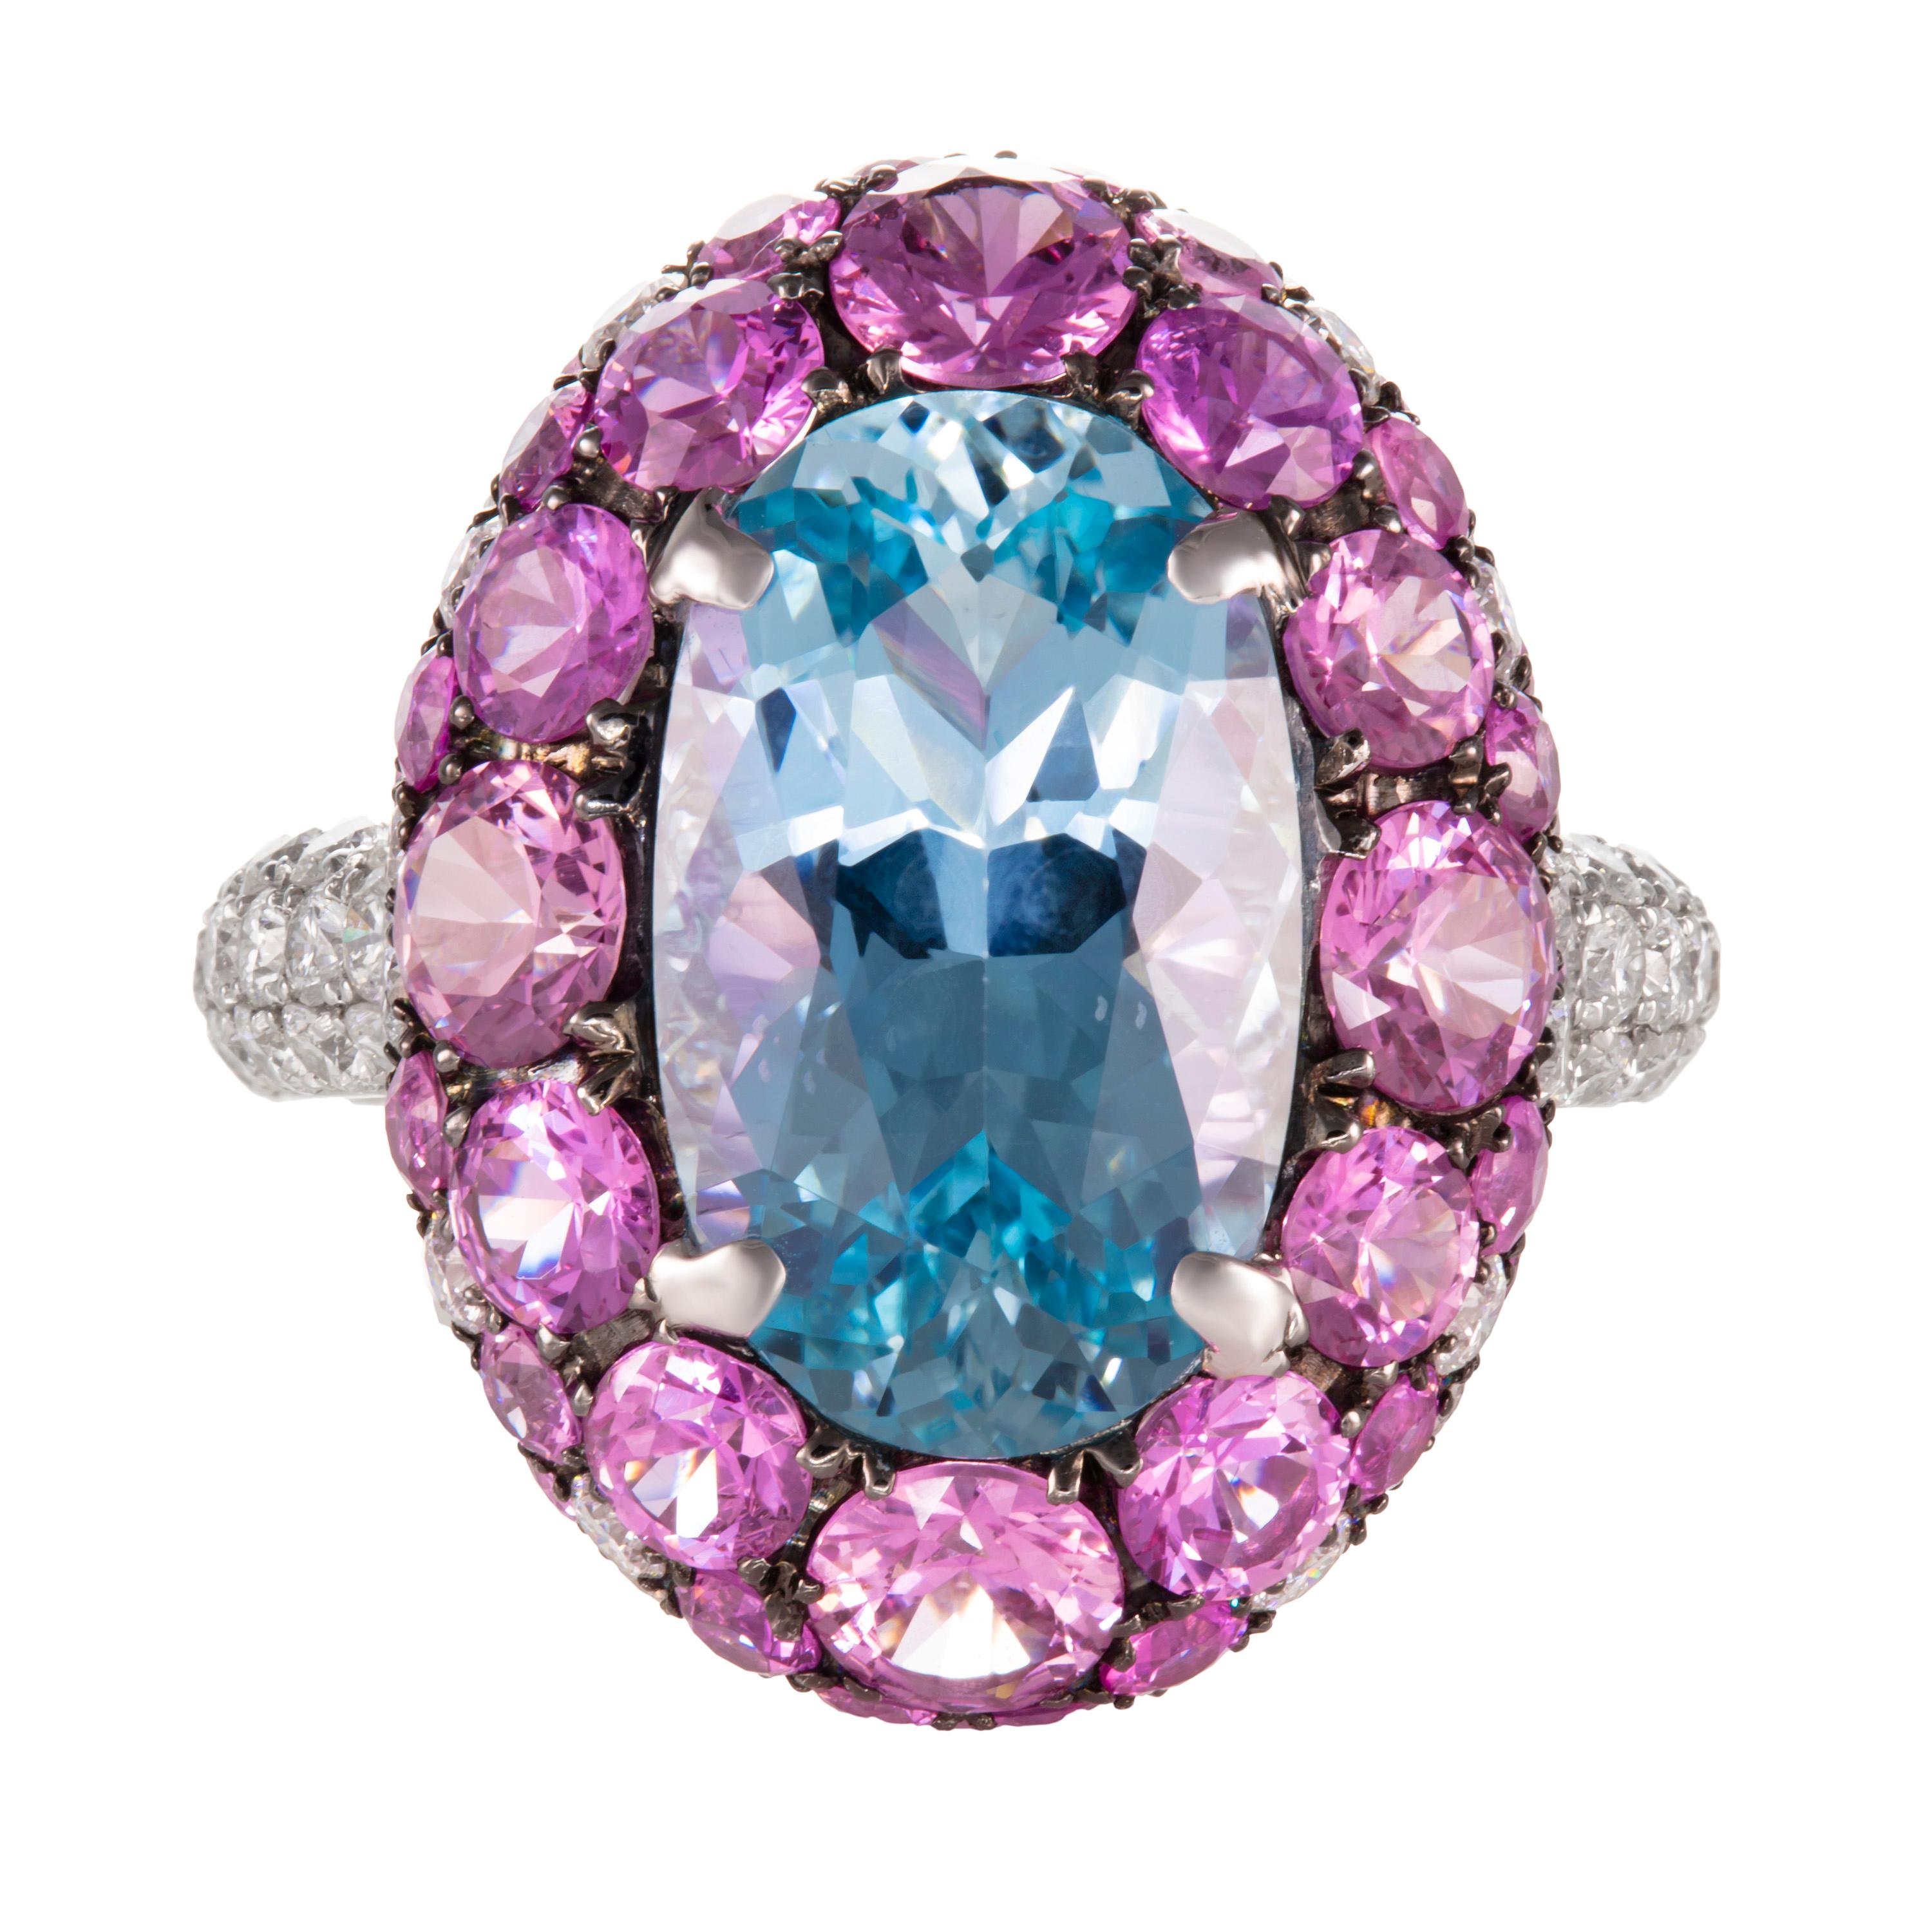 Butani's ring is crafted from 18 karat white gold. It is set with a 5.27 carat oval aquamarine and encompassed with 4.41 carats of round pink sapphires and 1.51 carats of white diamonds.  Currently a ring size US 8.  For other sizes, please contact